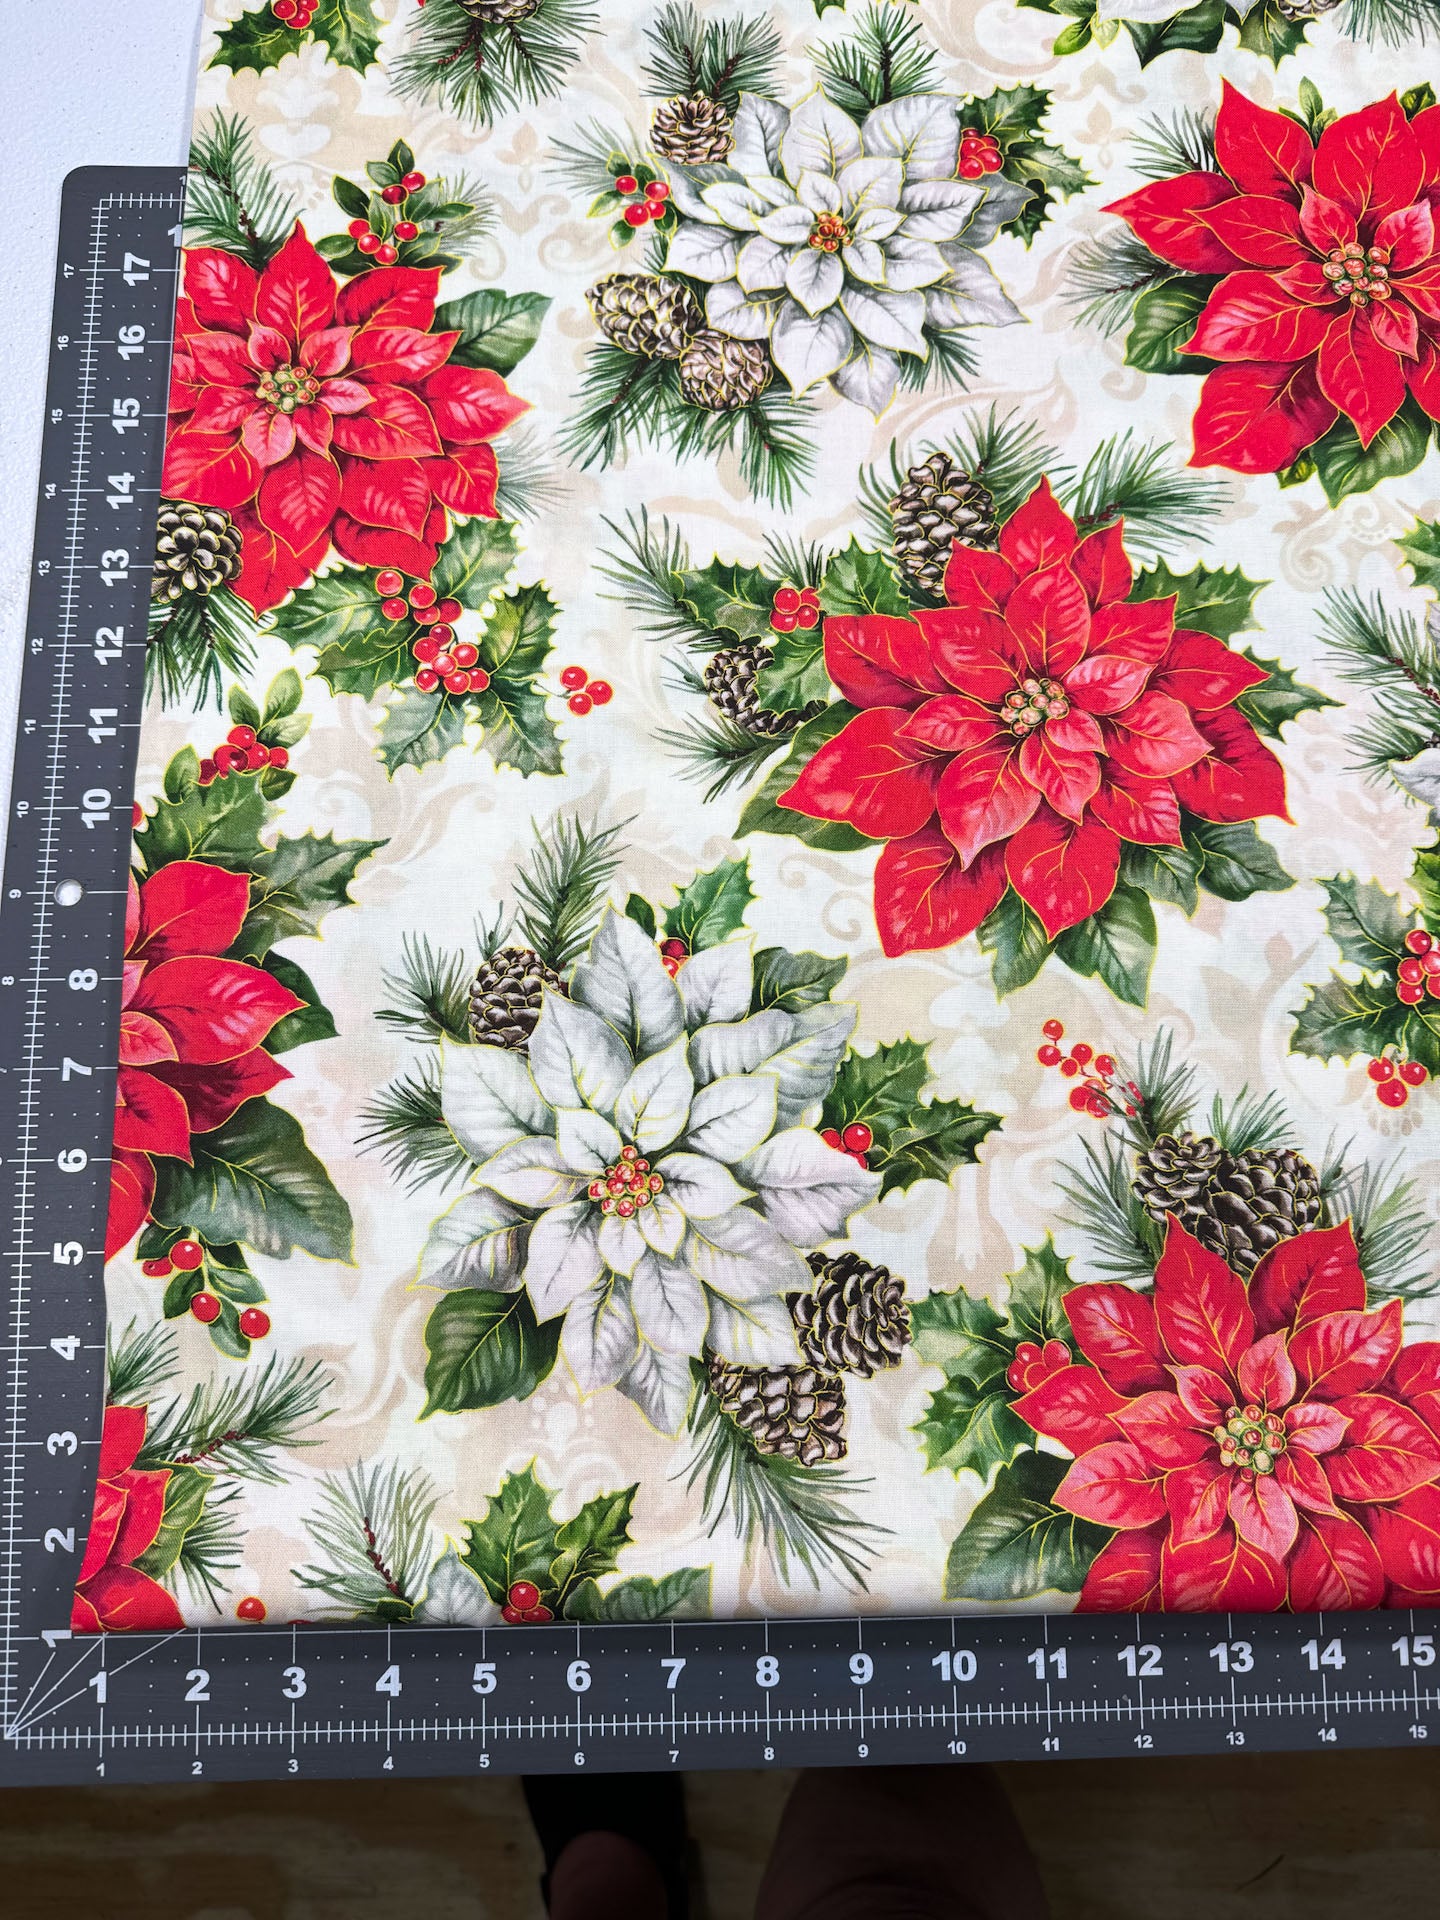 White and Red Poinsettia fabric Christmas cotton fabric